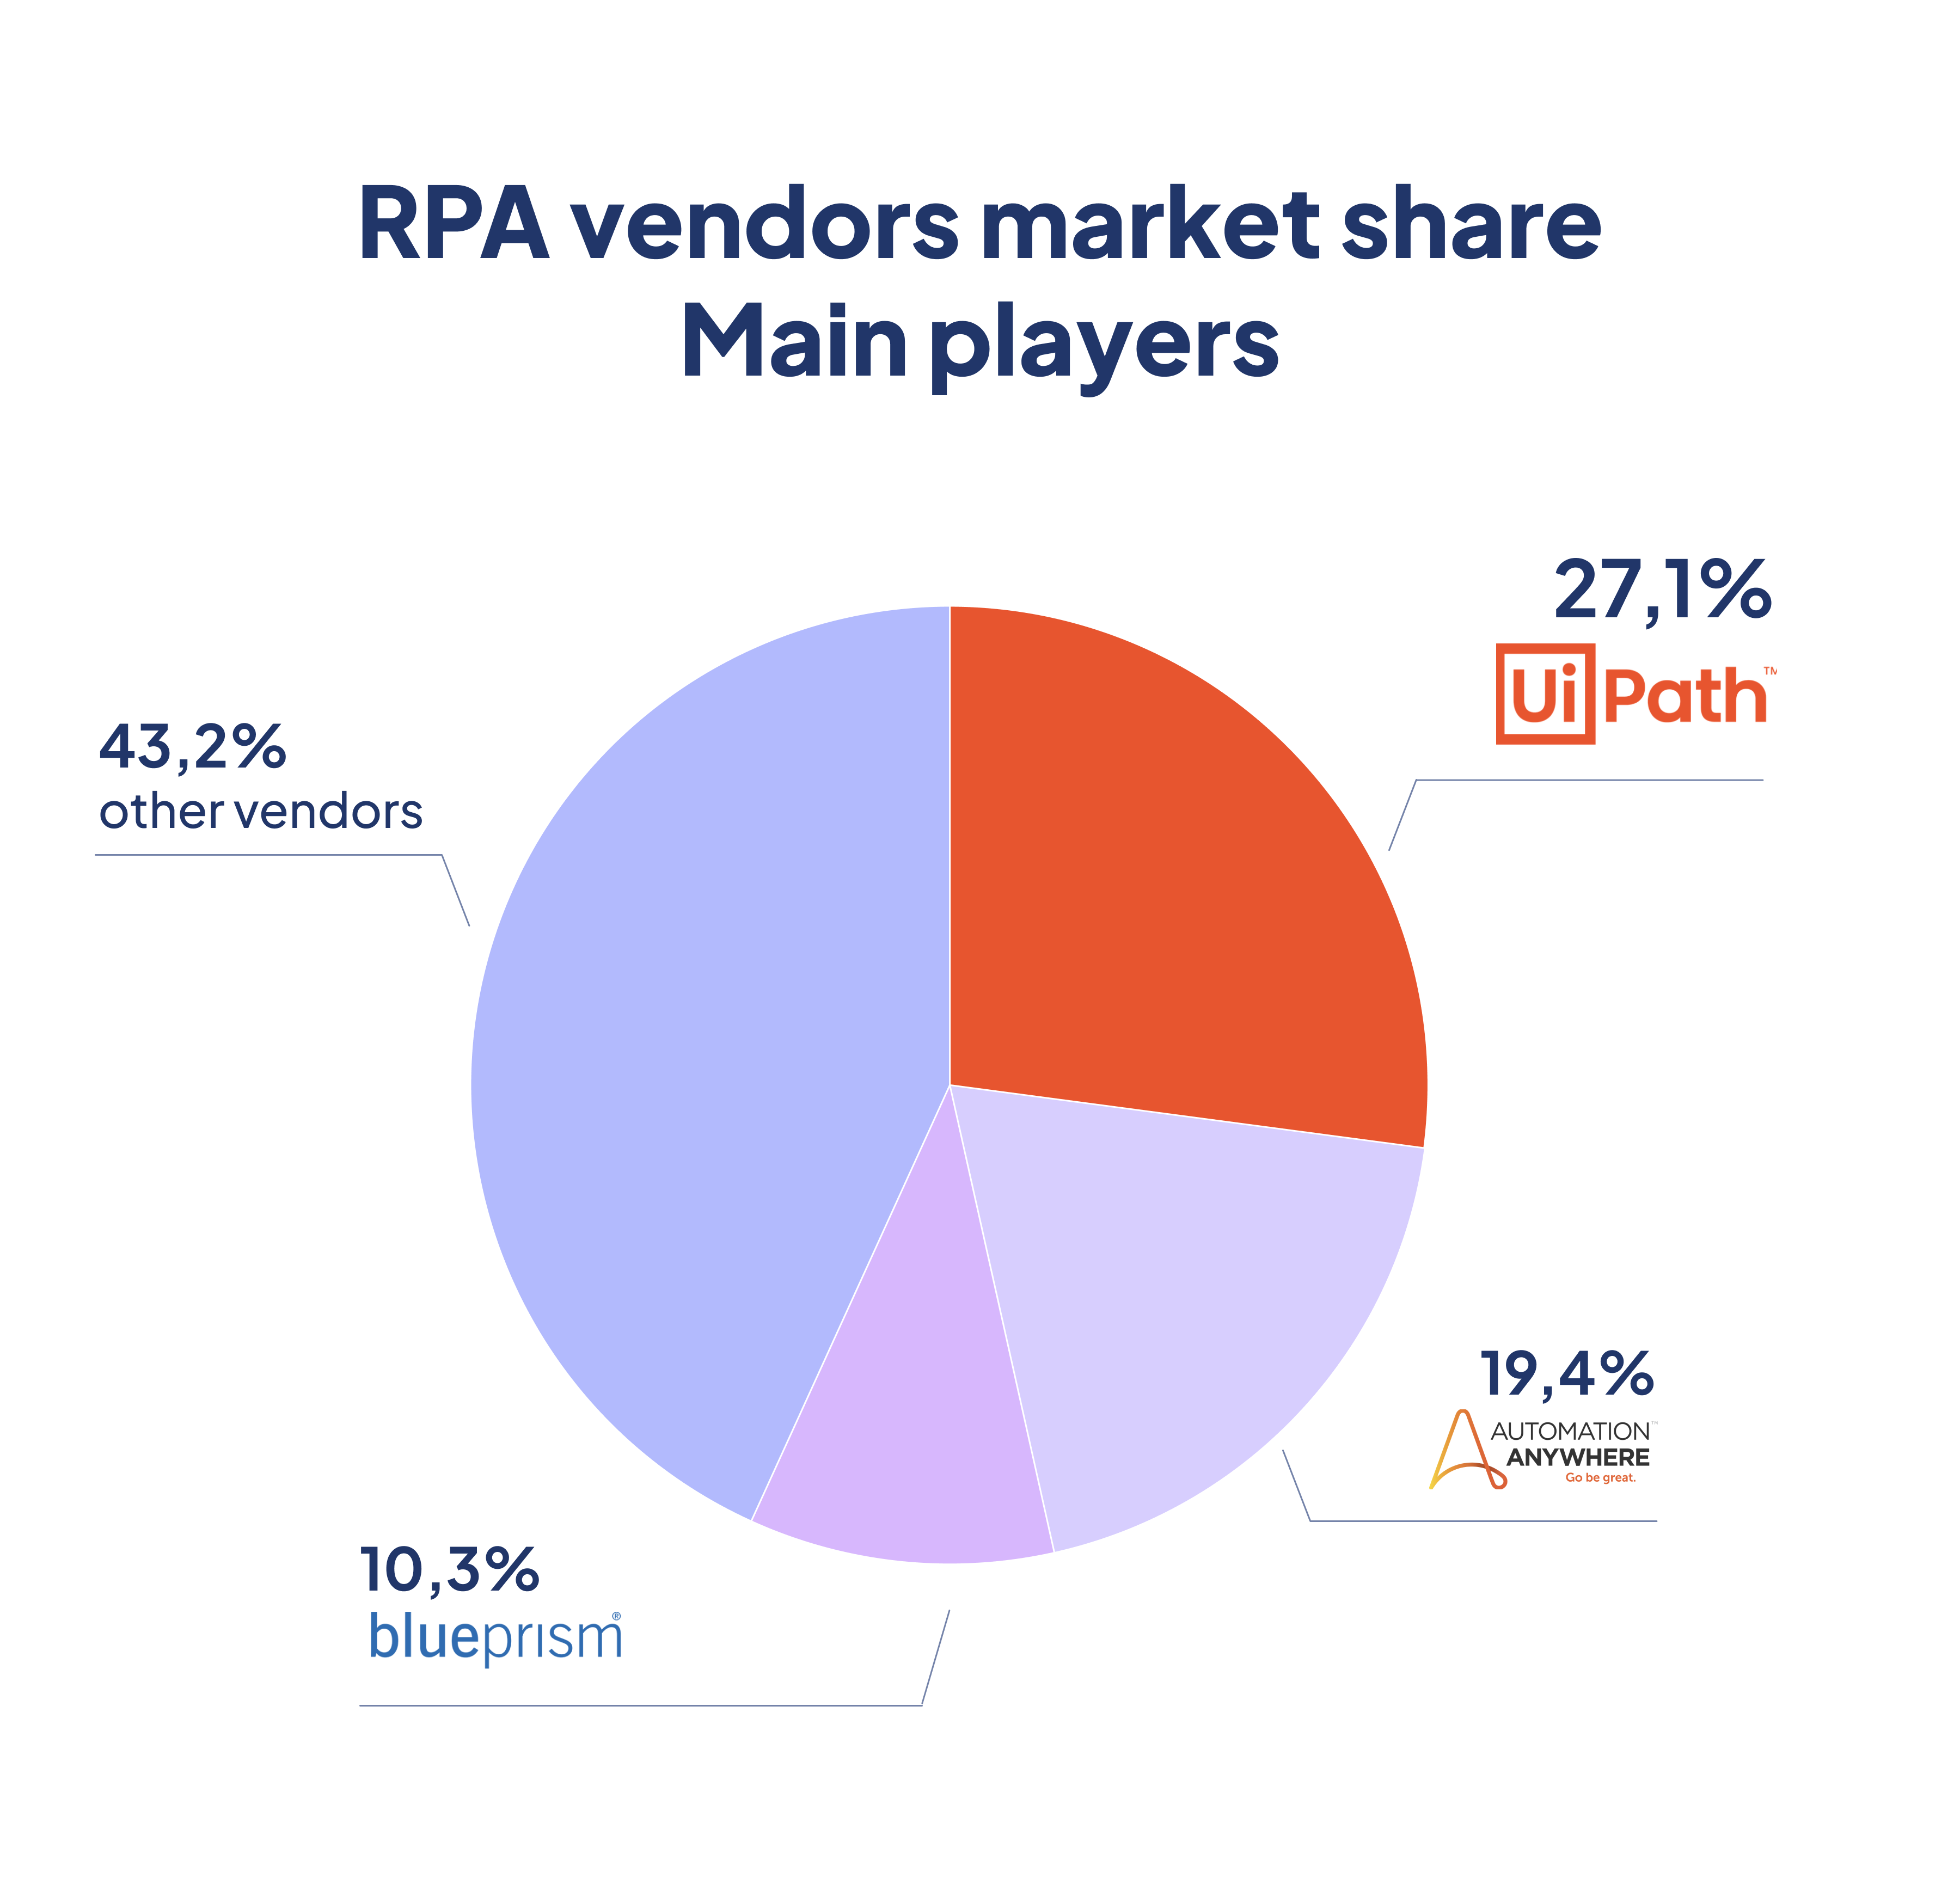 Uipath vs Automation Anywhere market size compared